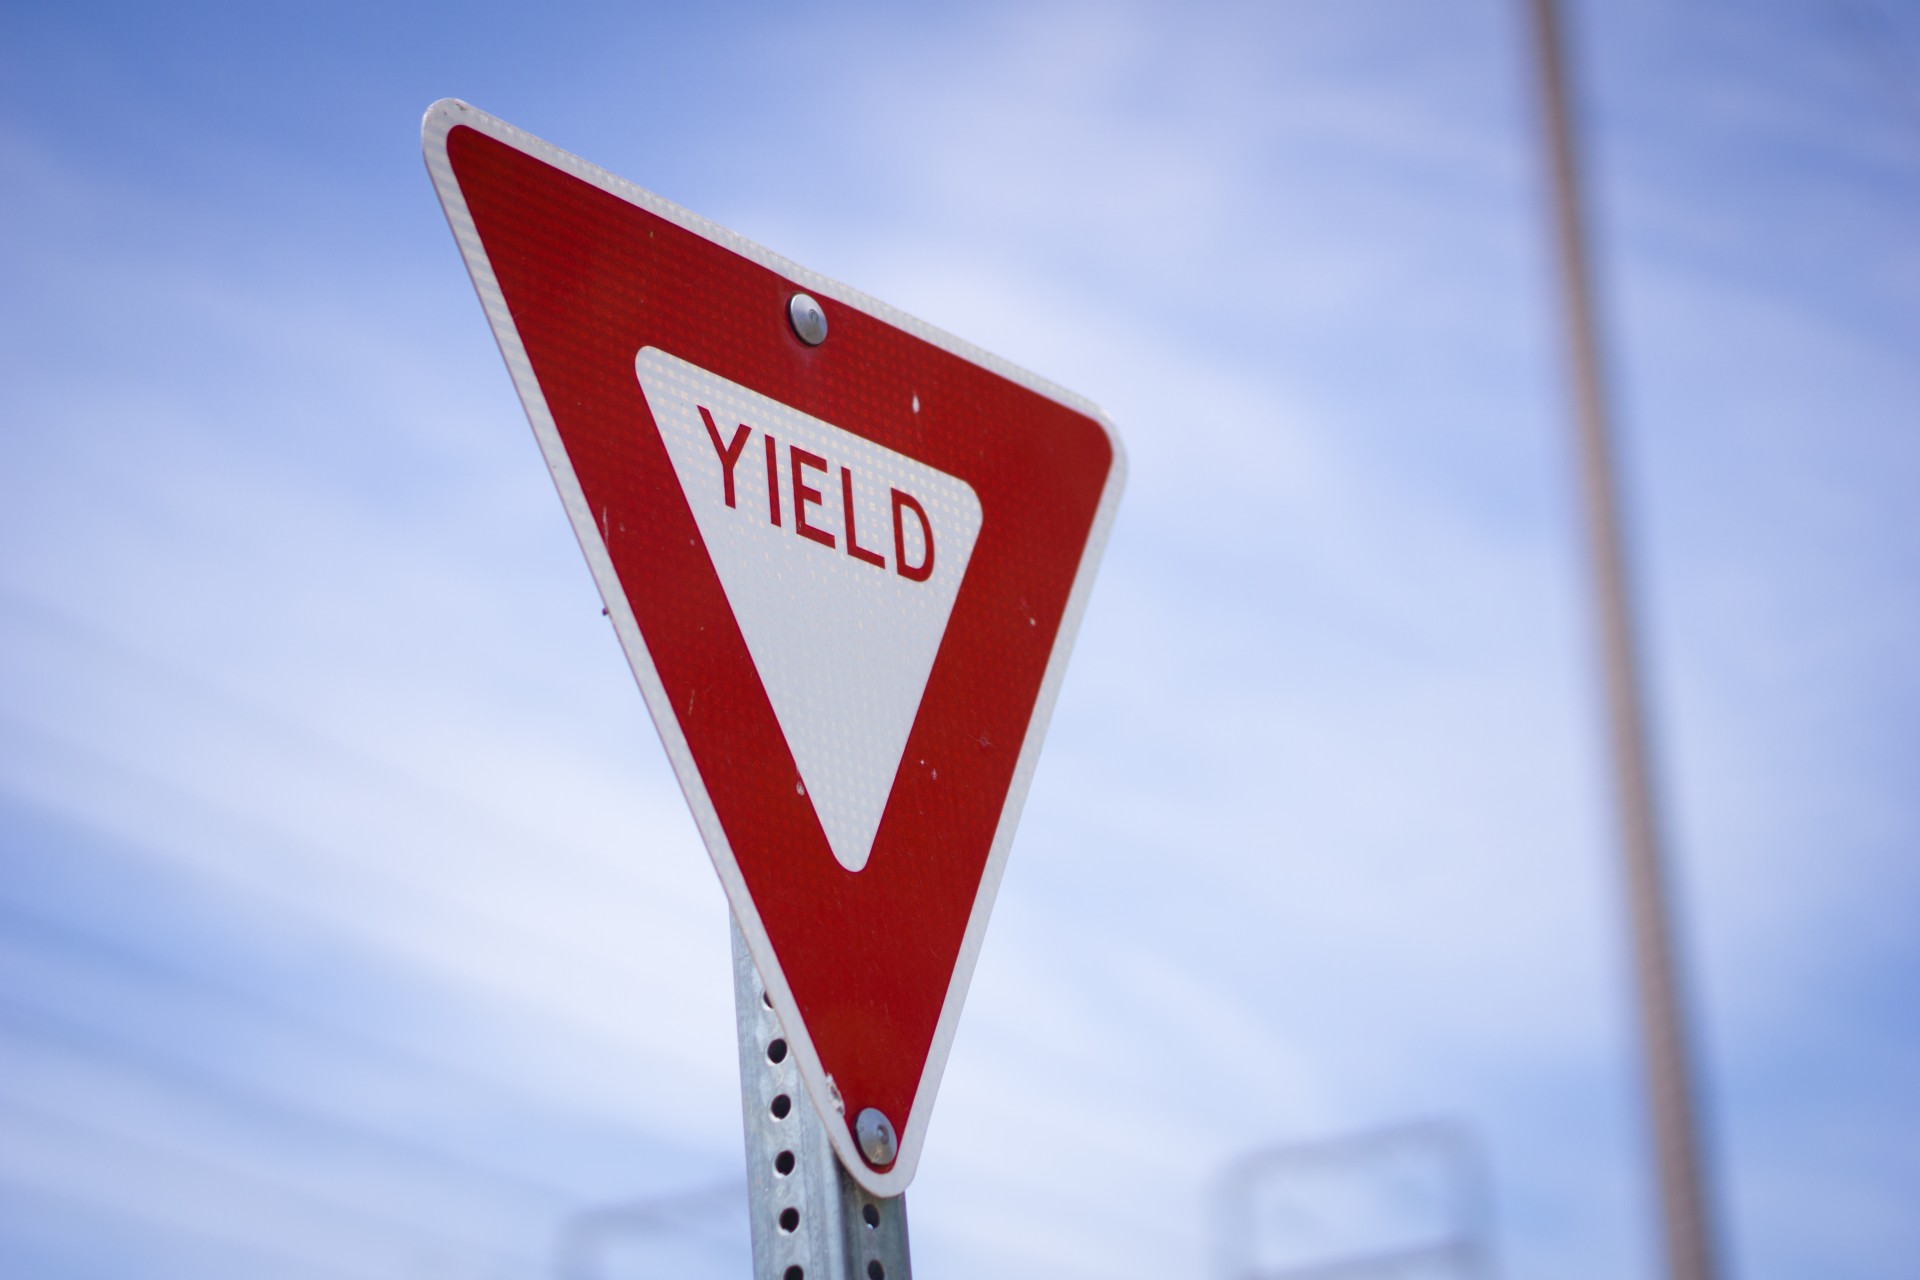 Red and white Yield Road sign long a street.